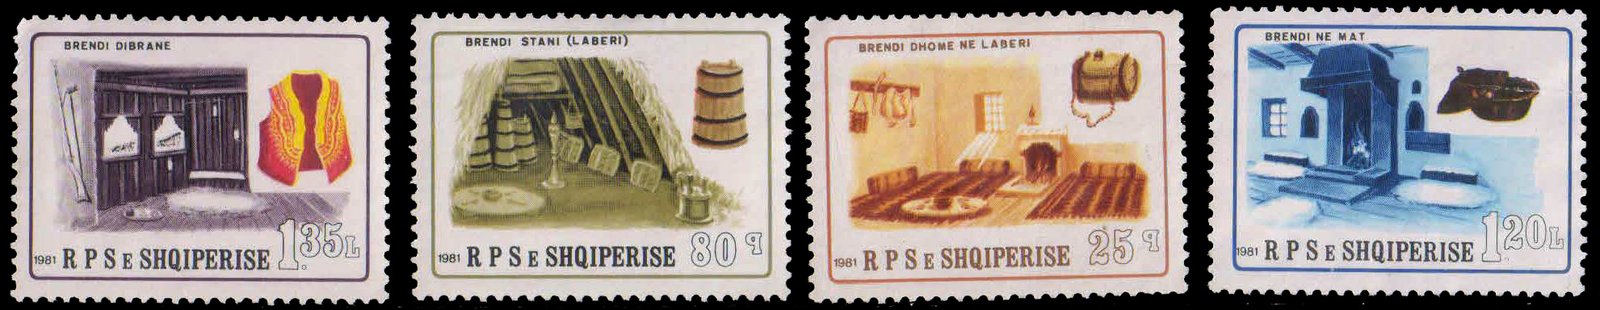 ALBANIA 1980-Interiors, Fireplace, Pottery, Weapons, Chair, Chimney, Set of 4, Mint G/W, S.G. 2036-39-Cat � 5-